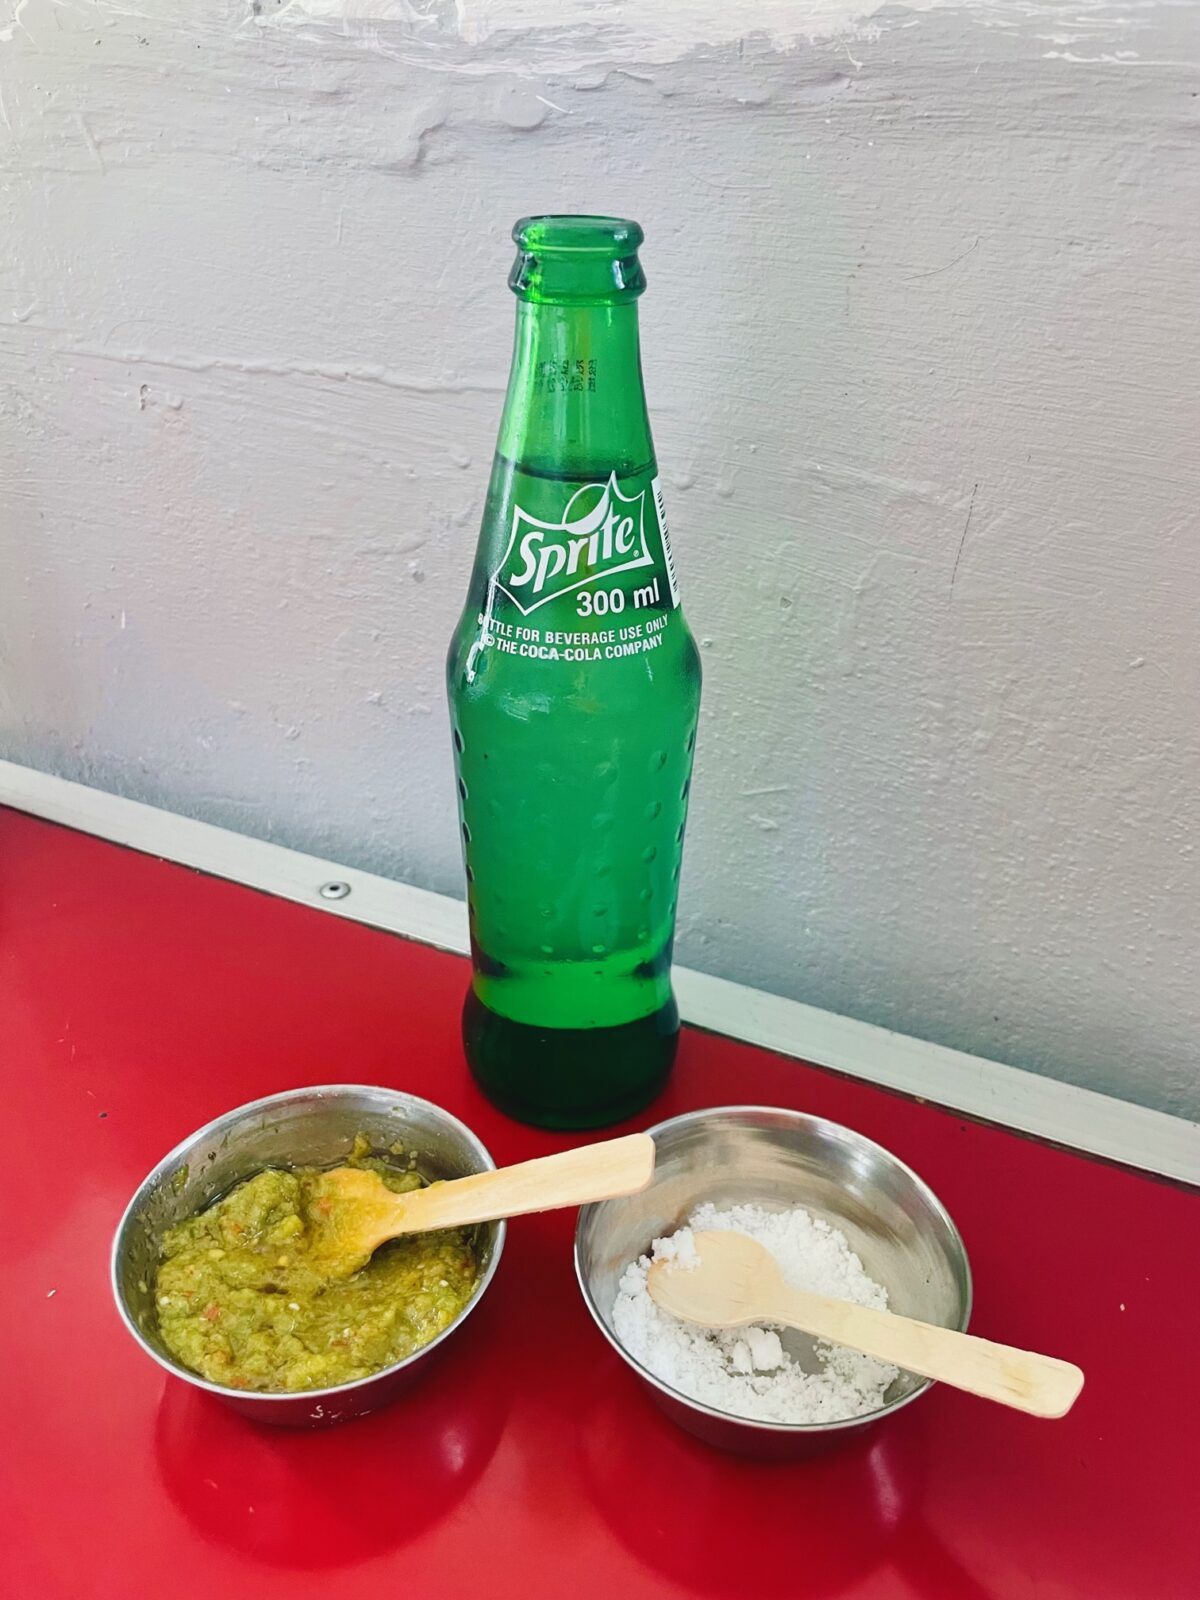 Mauritian green mazavaroo chili paste and salt and bottle of Sprite